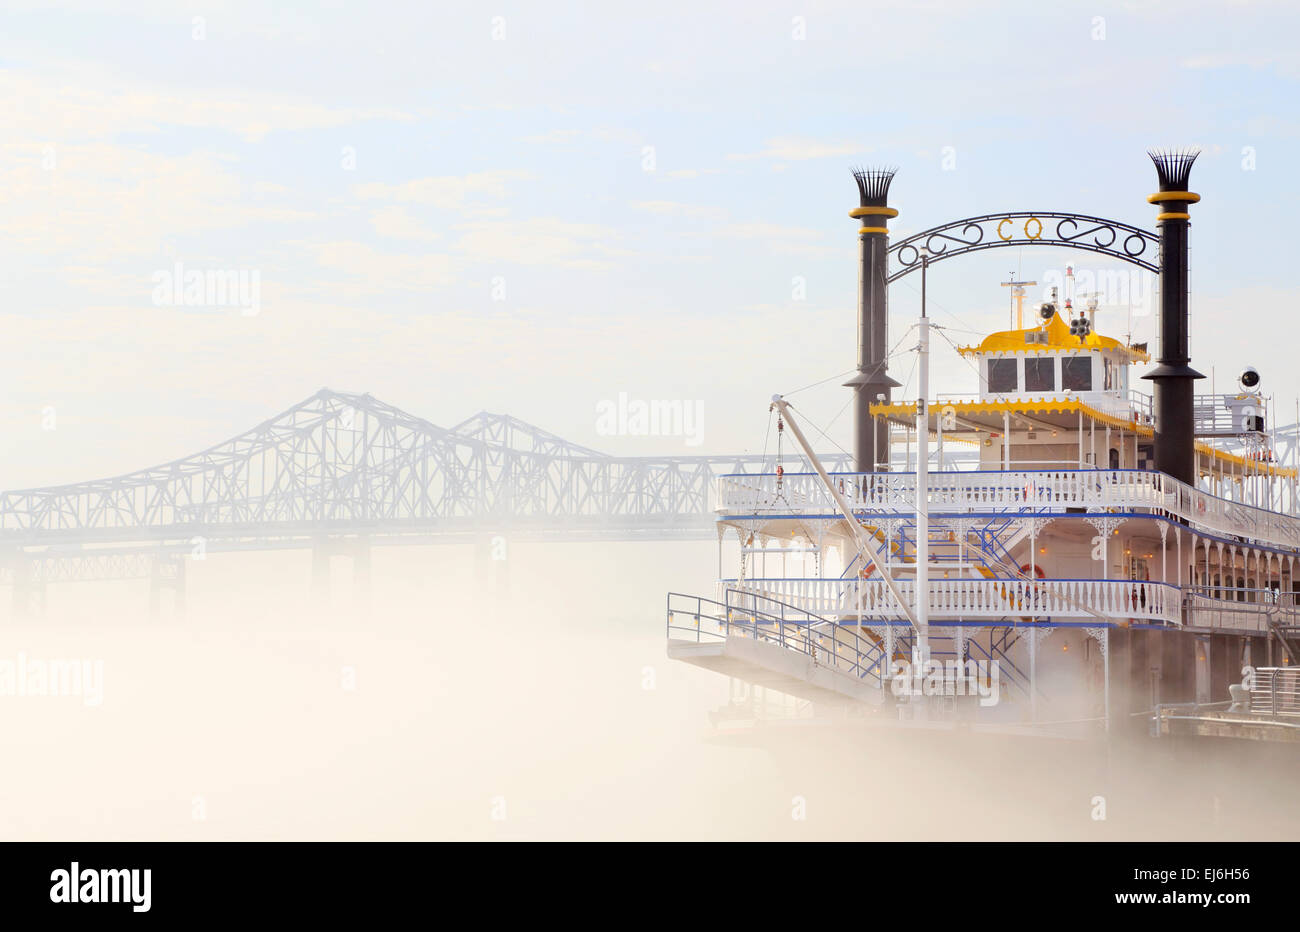 New Orleans, Louisiana. Creole Queen cruise ship on a foggy Mississippi river with Crescent City Connection bridge. Stock Photo